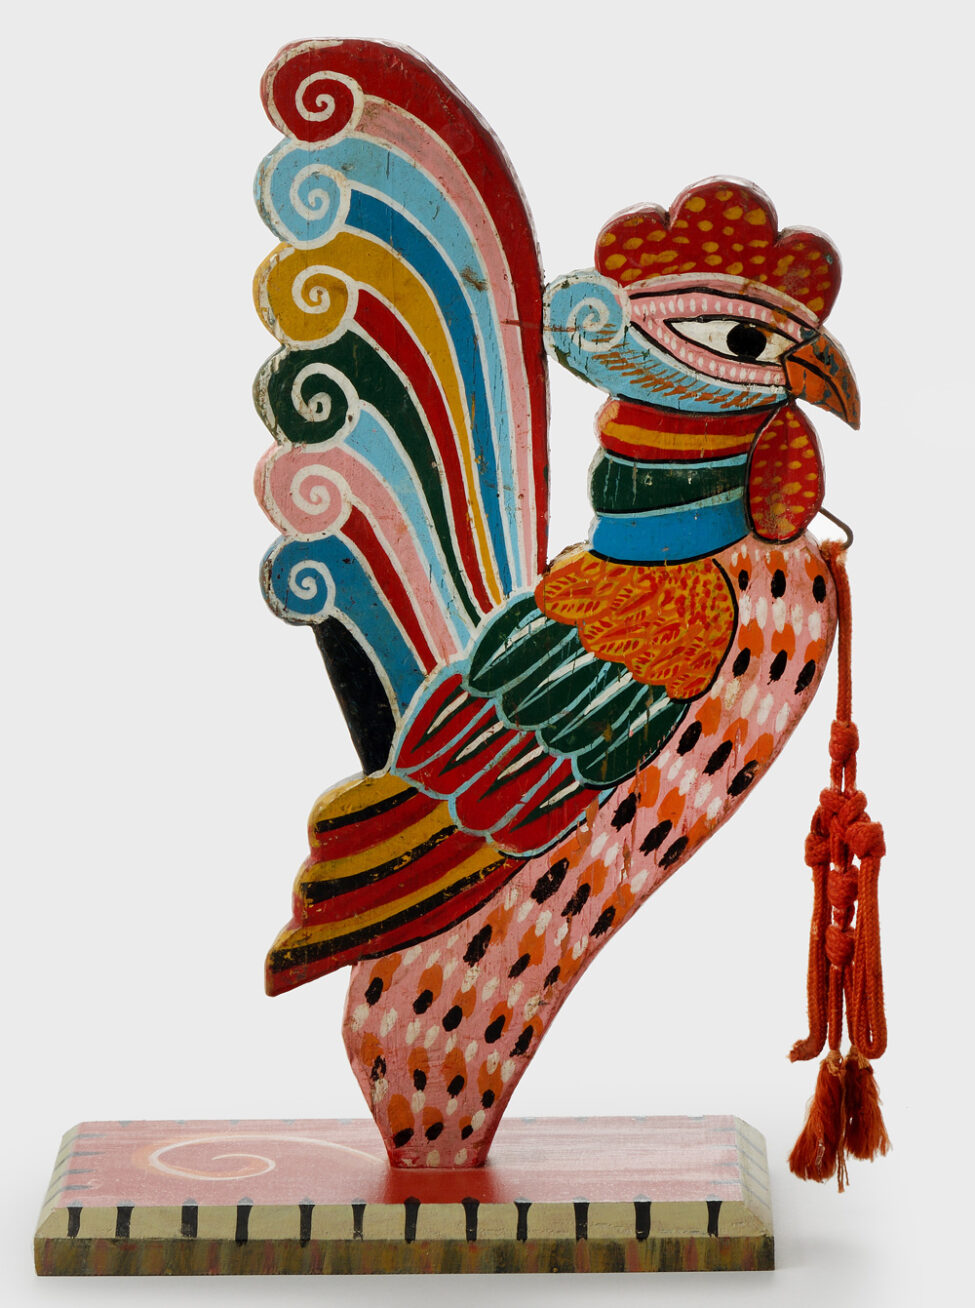 Wooden sculpture of a rooster